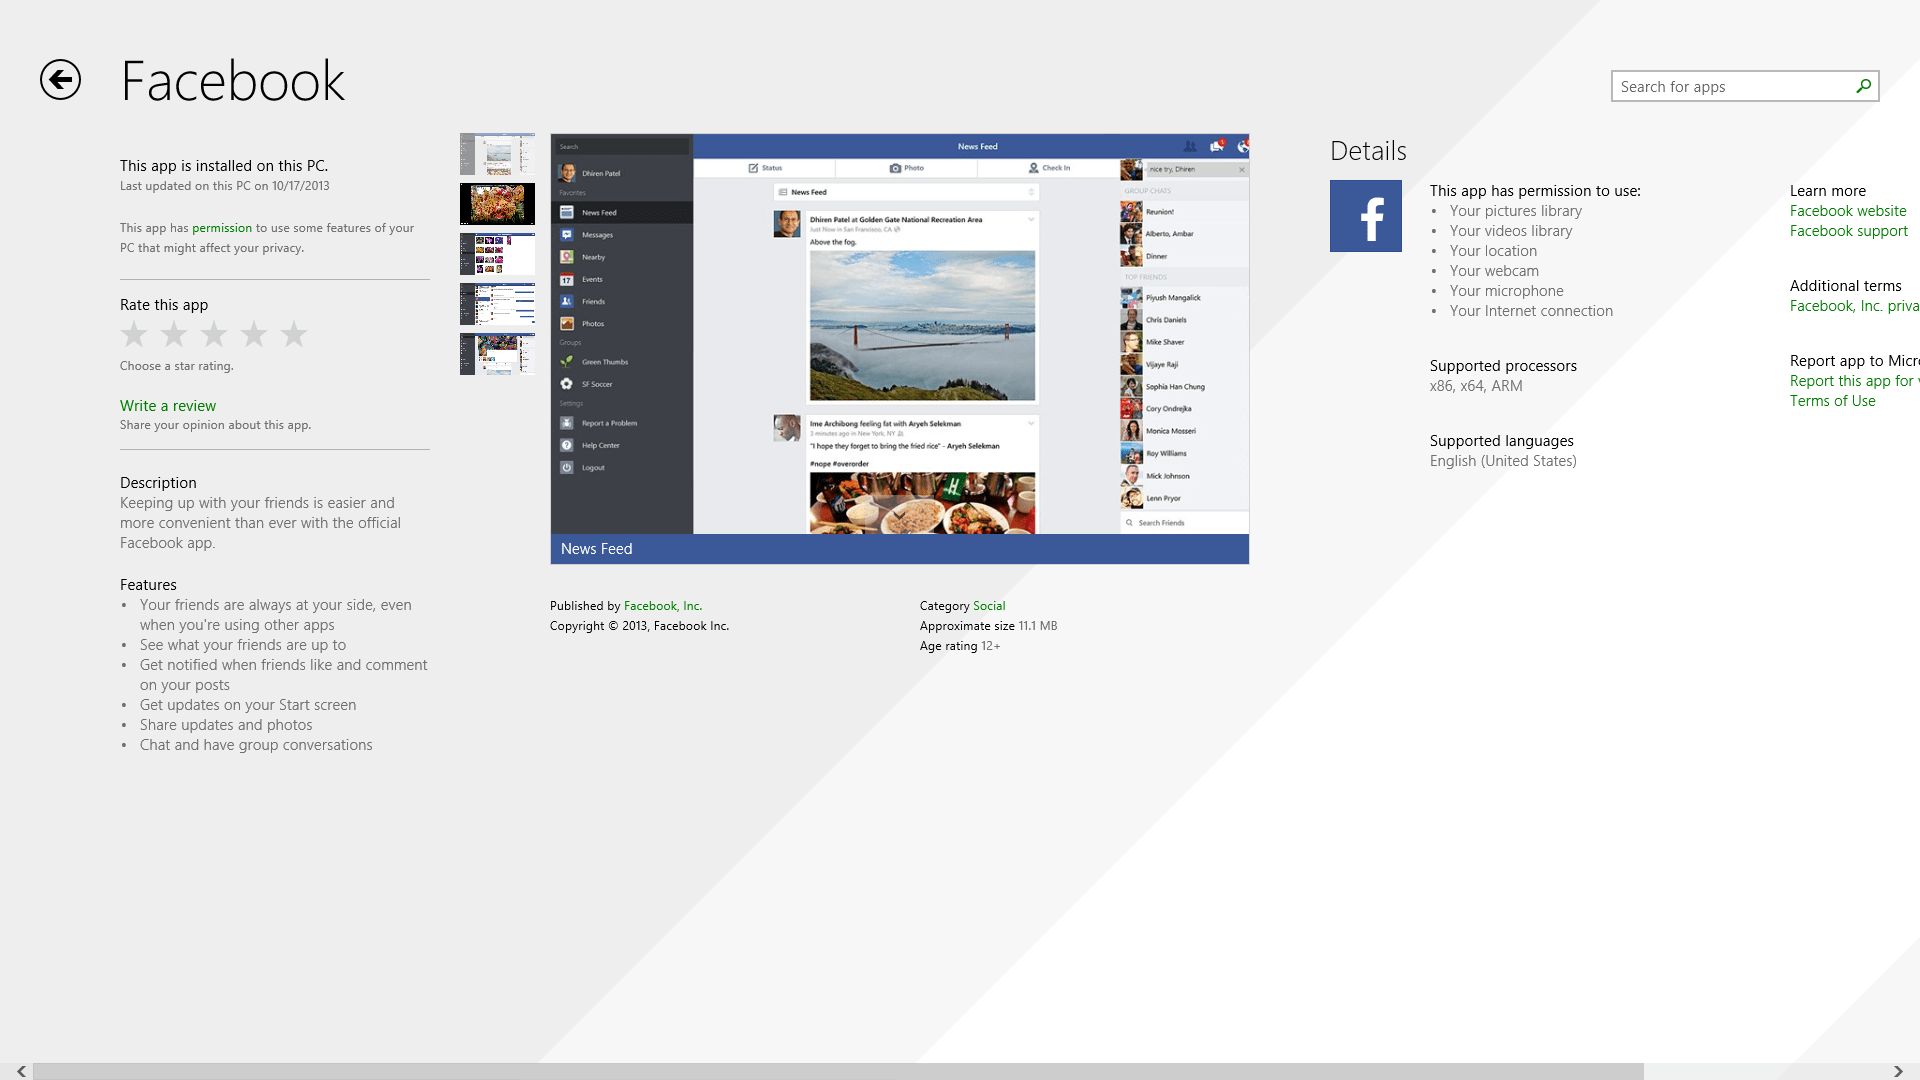 facebook download for free